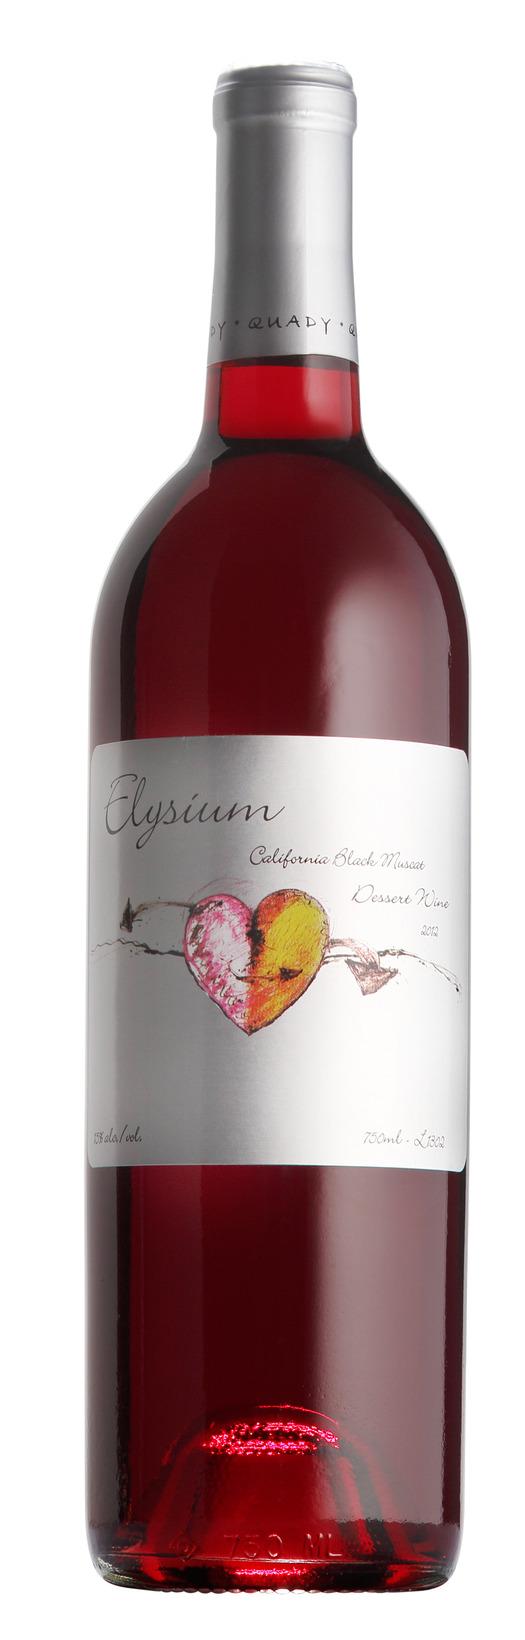 Editors Choice 91 POINTS 2014 ELYSIUM "An amazingly sweet and rich wine, this has a floral aroma and great concentration.